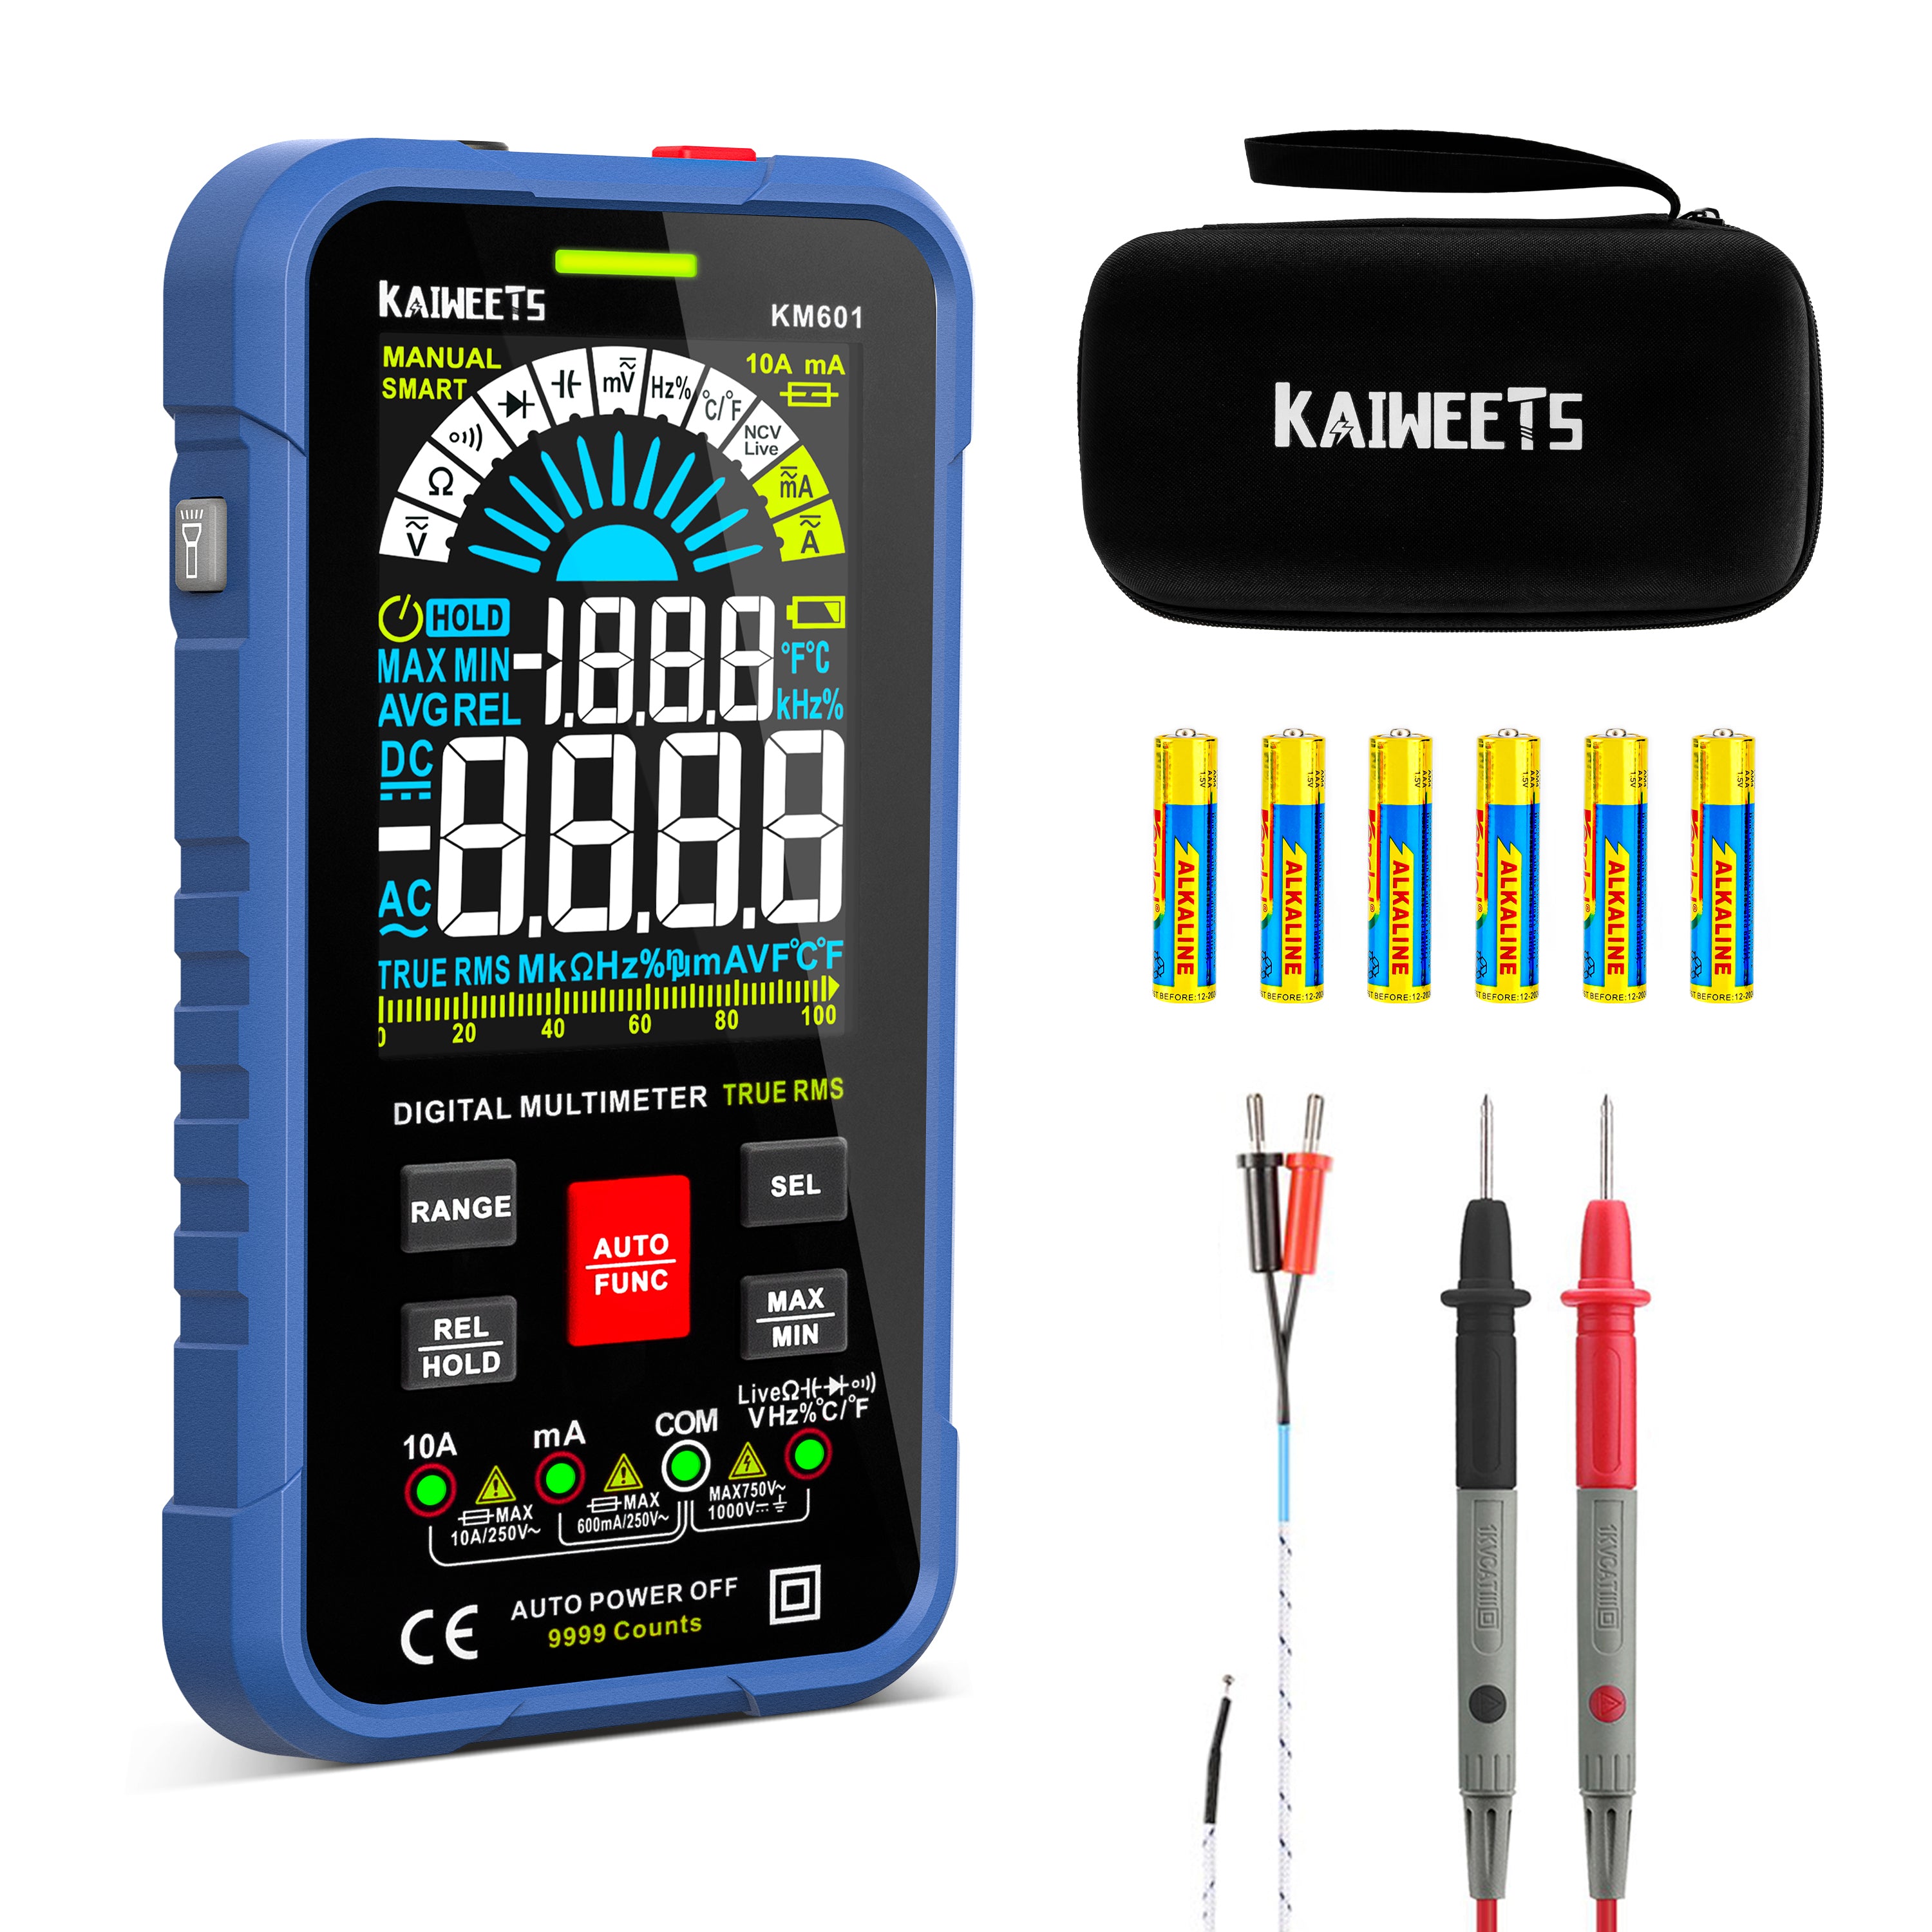 KAIWEETS KM601 Auto-Ranging Digital Multimeter, Smart Multimer with Colorful LCD Screen, 9999 Counts True-RMS Meter